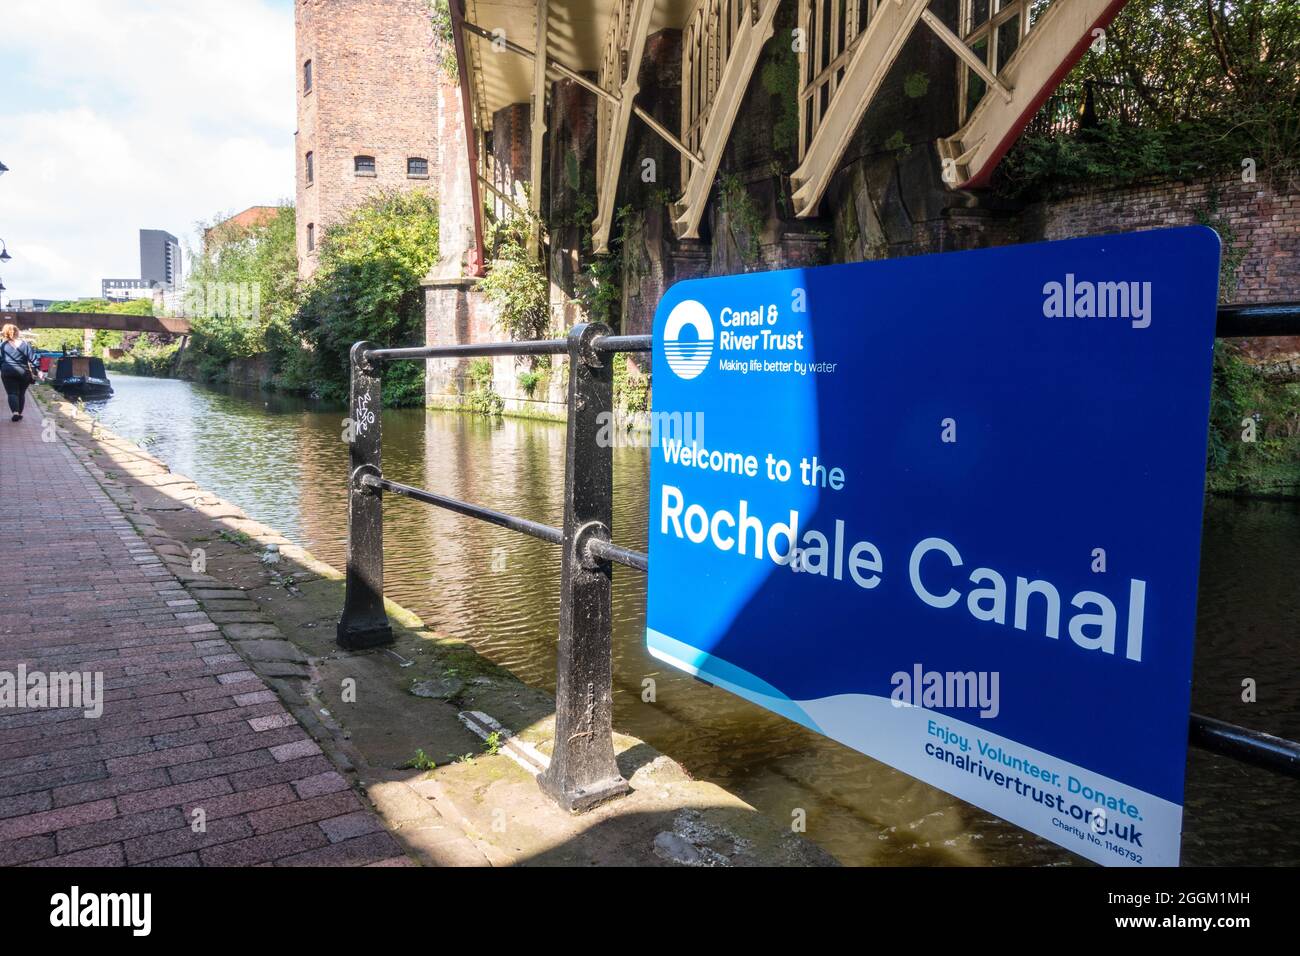 Rochdale canal part of Canal and River trust in Manchester city center Stock Photo